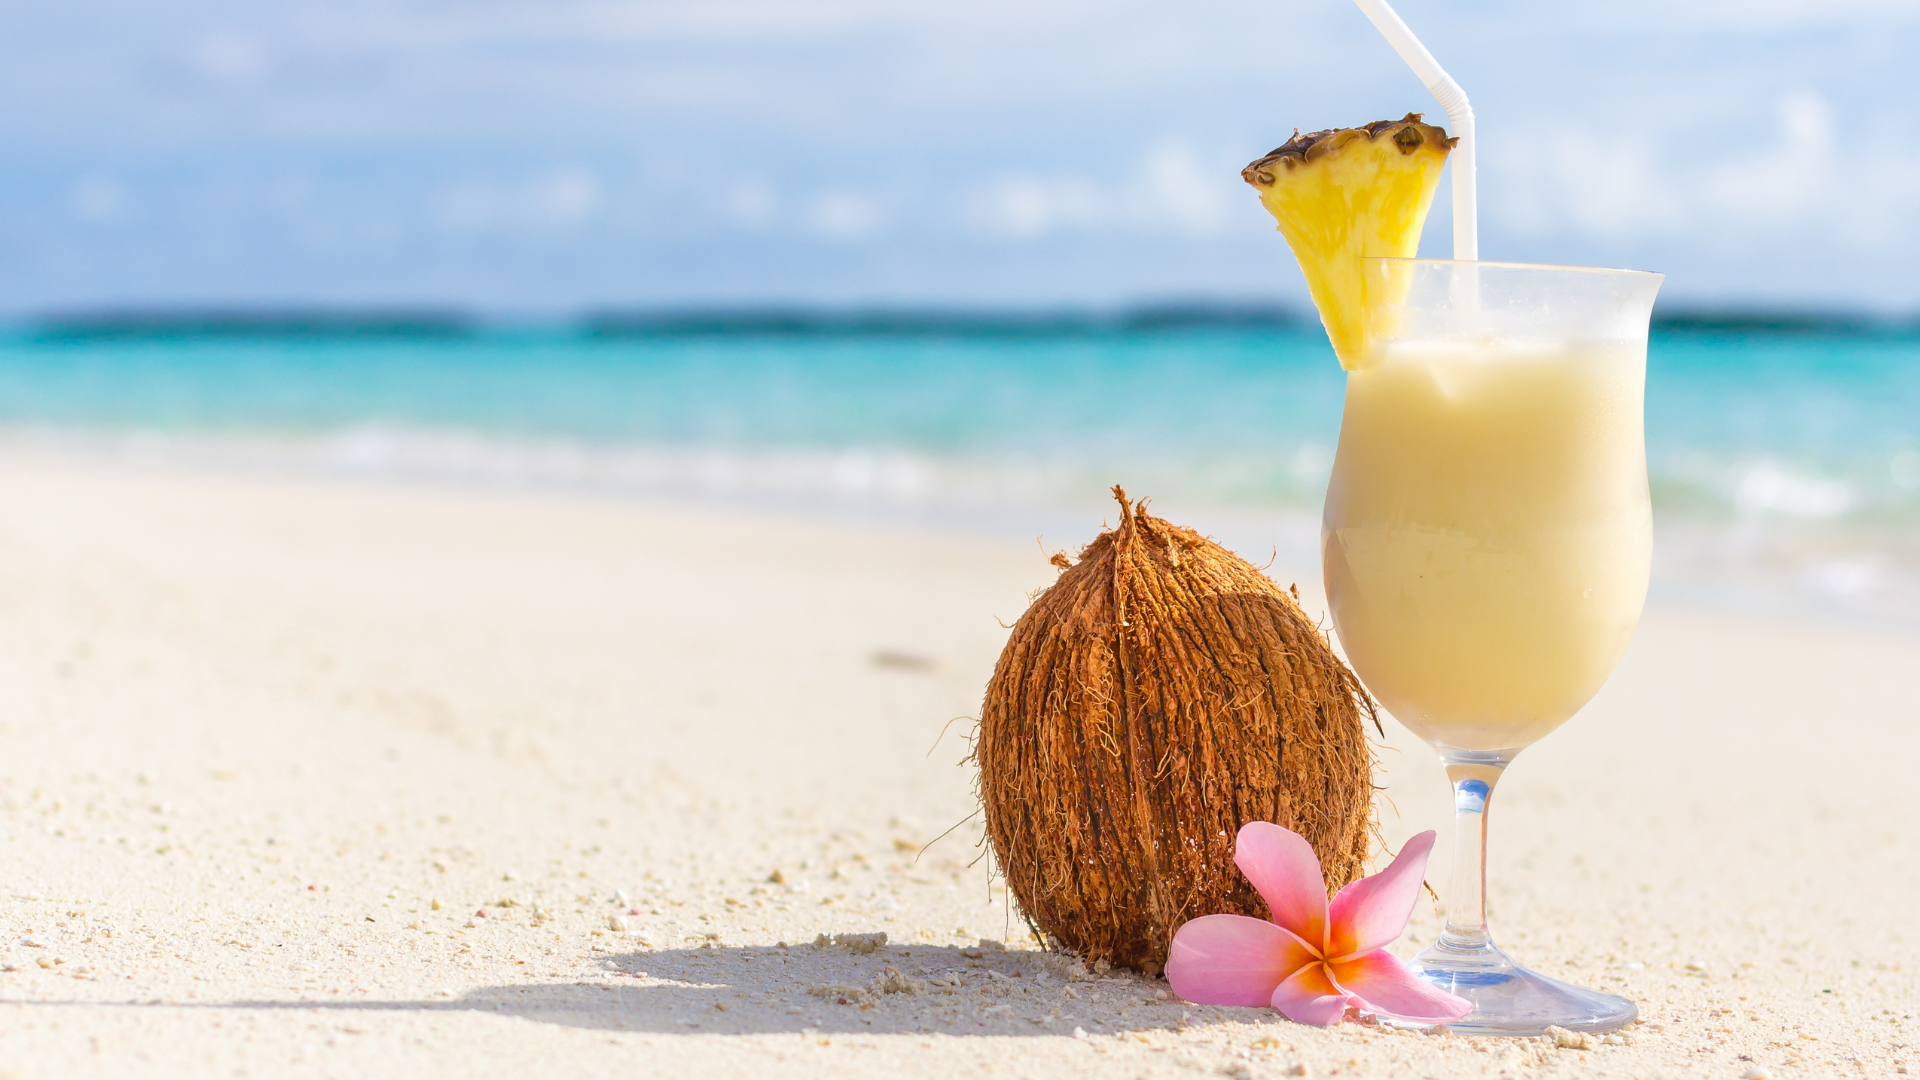 Pina colada and a coconut on a beach